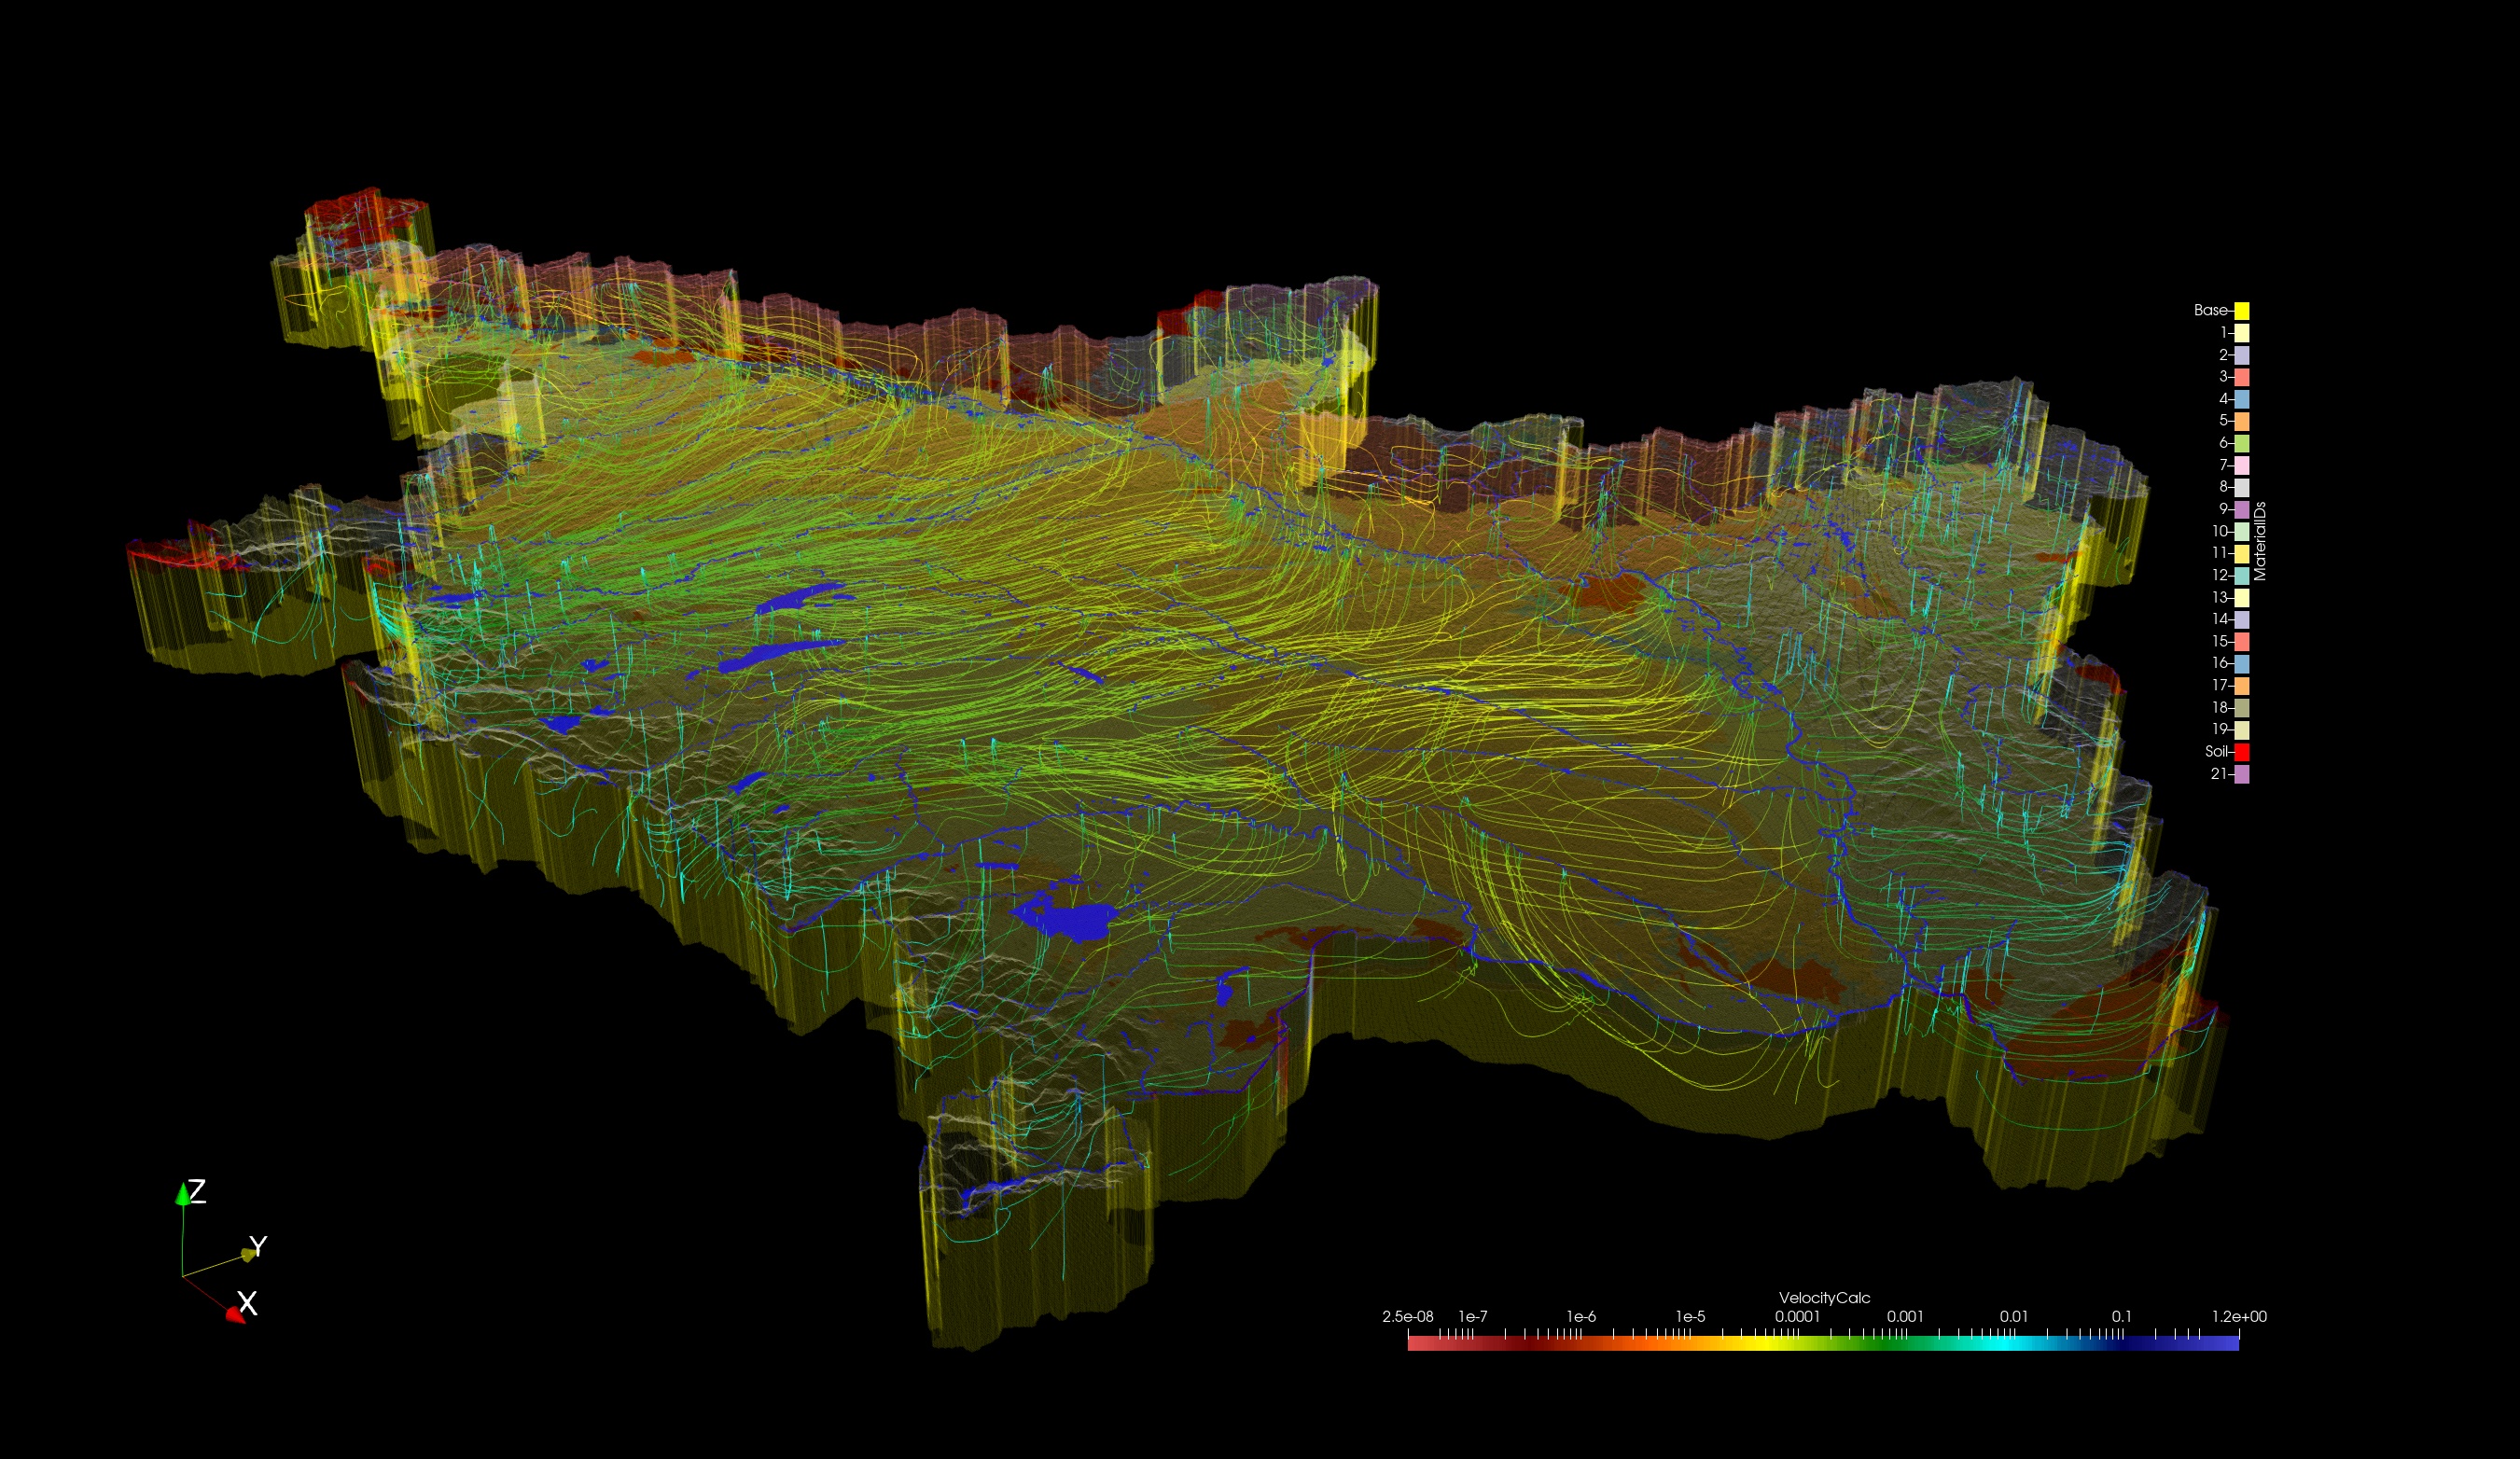 3D Flowline model for parts of the Danube Basin